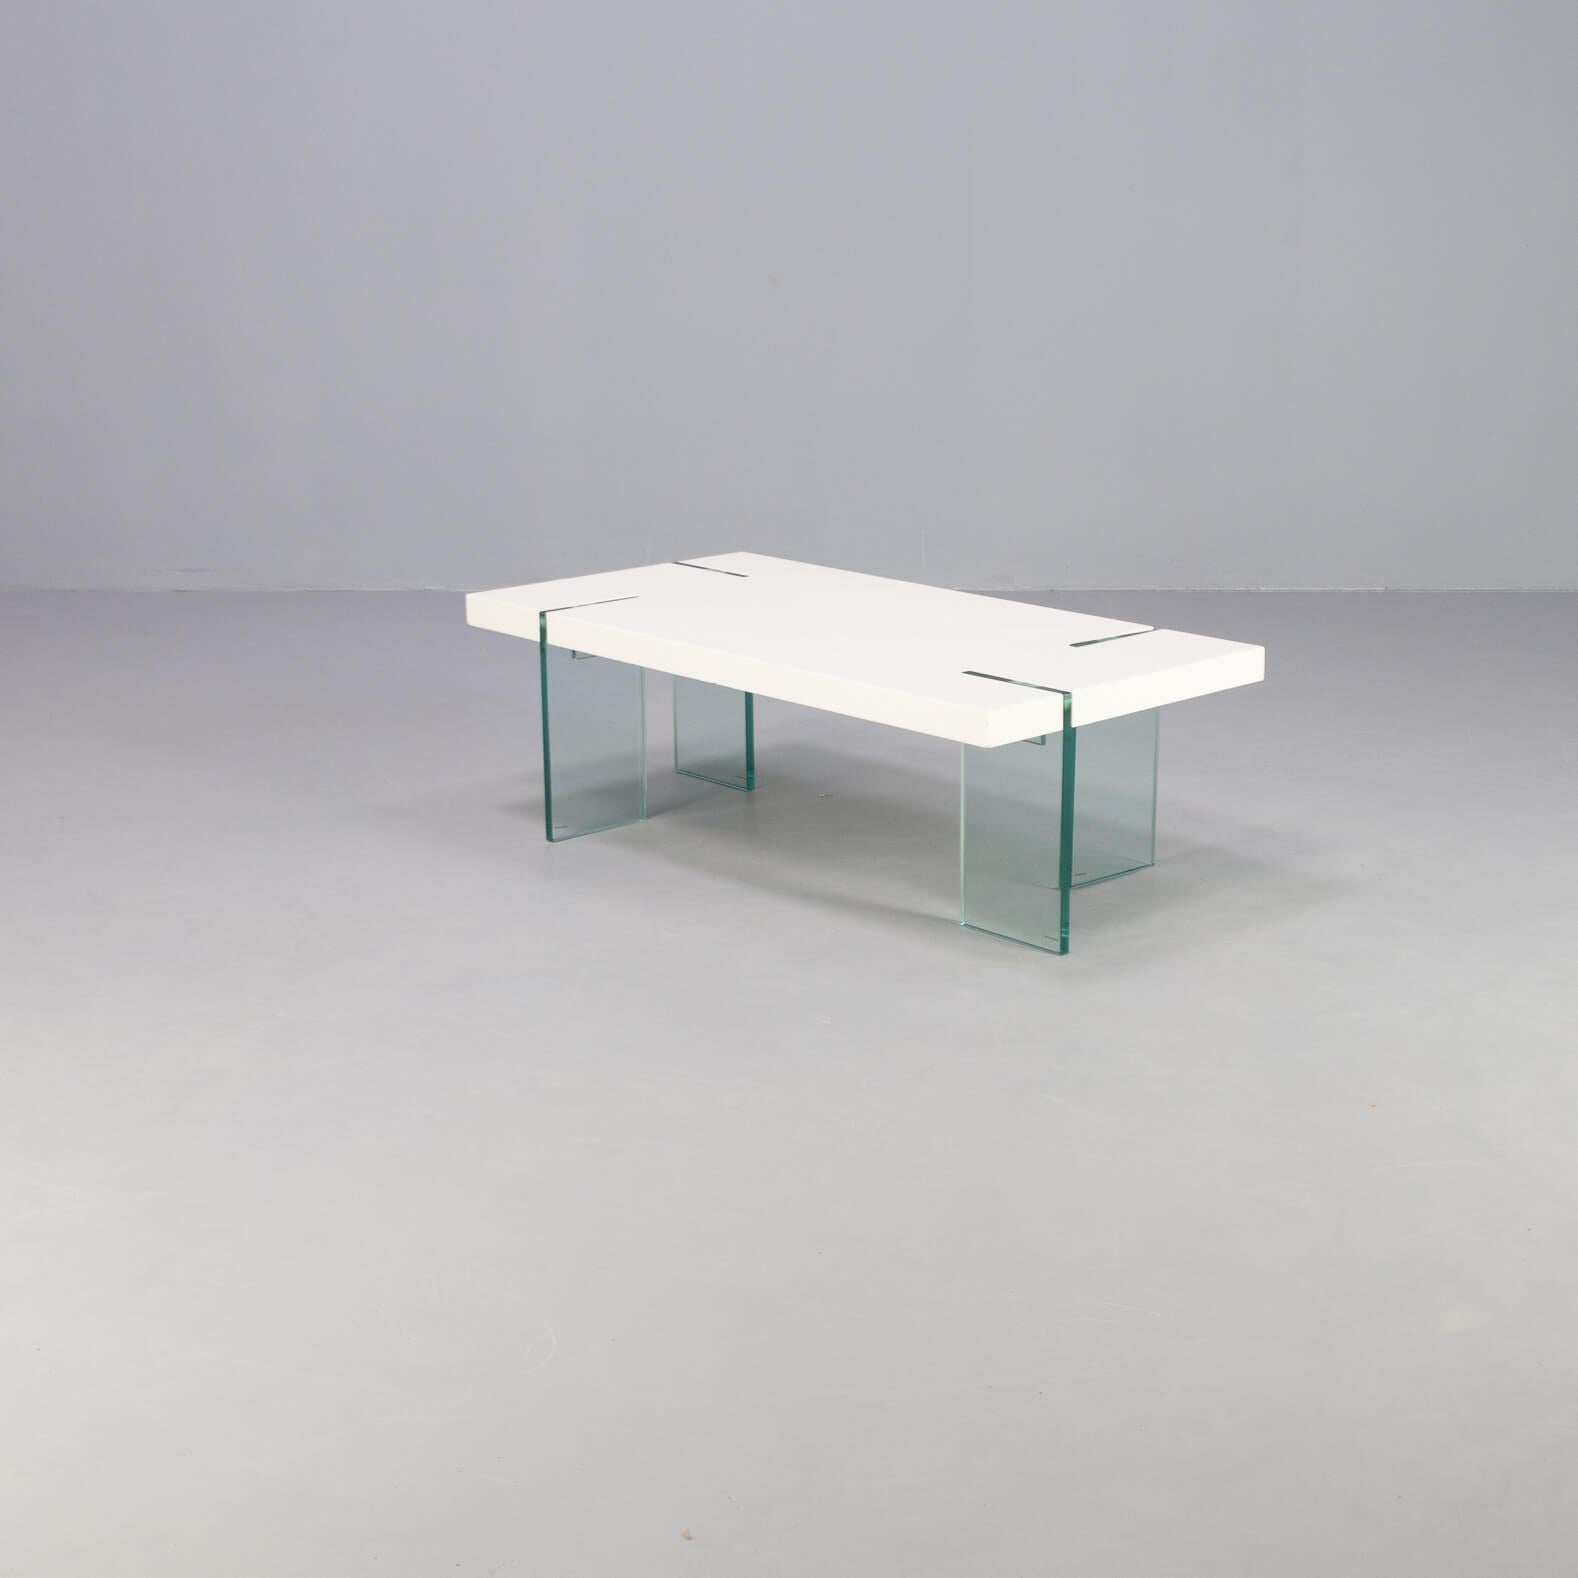 80s Italian Design Coffee Table with Glass Foot In Good Condition For Sale In Amstelveen, Noord